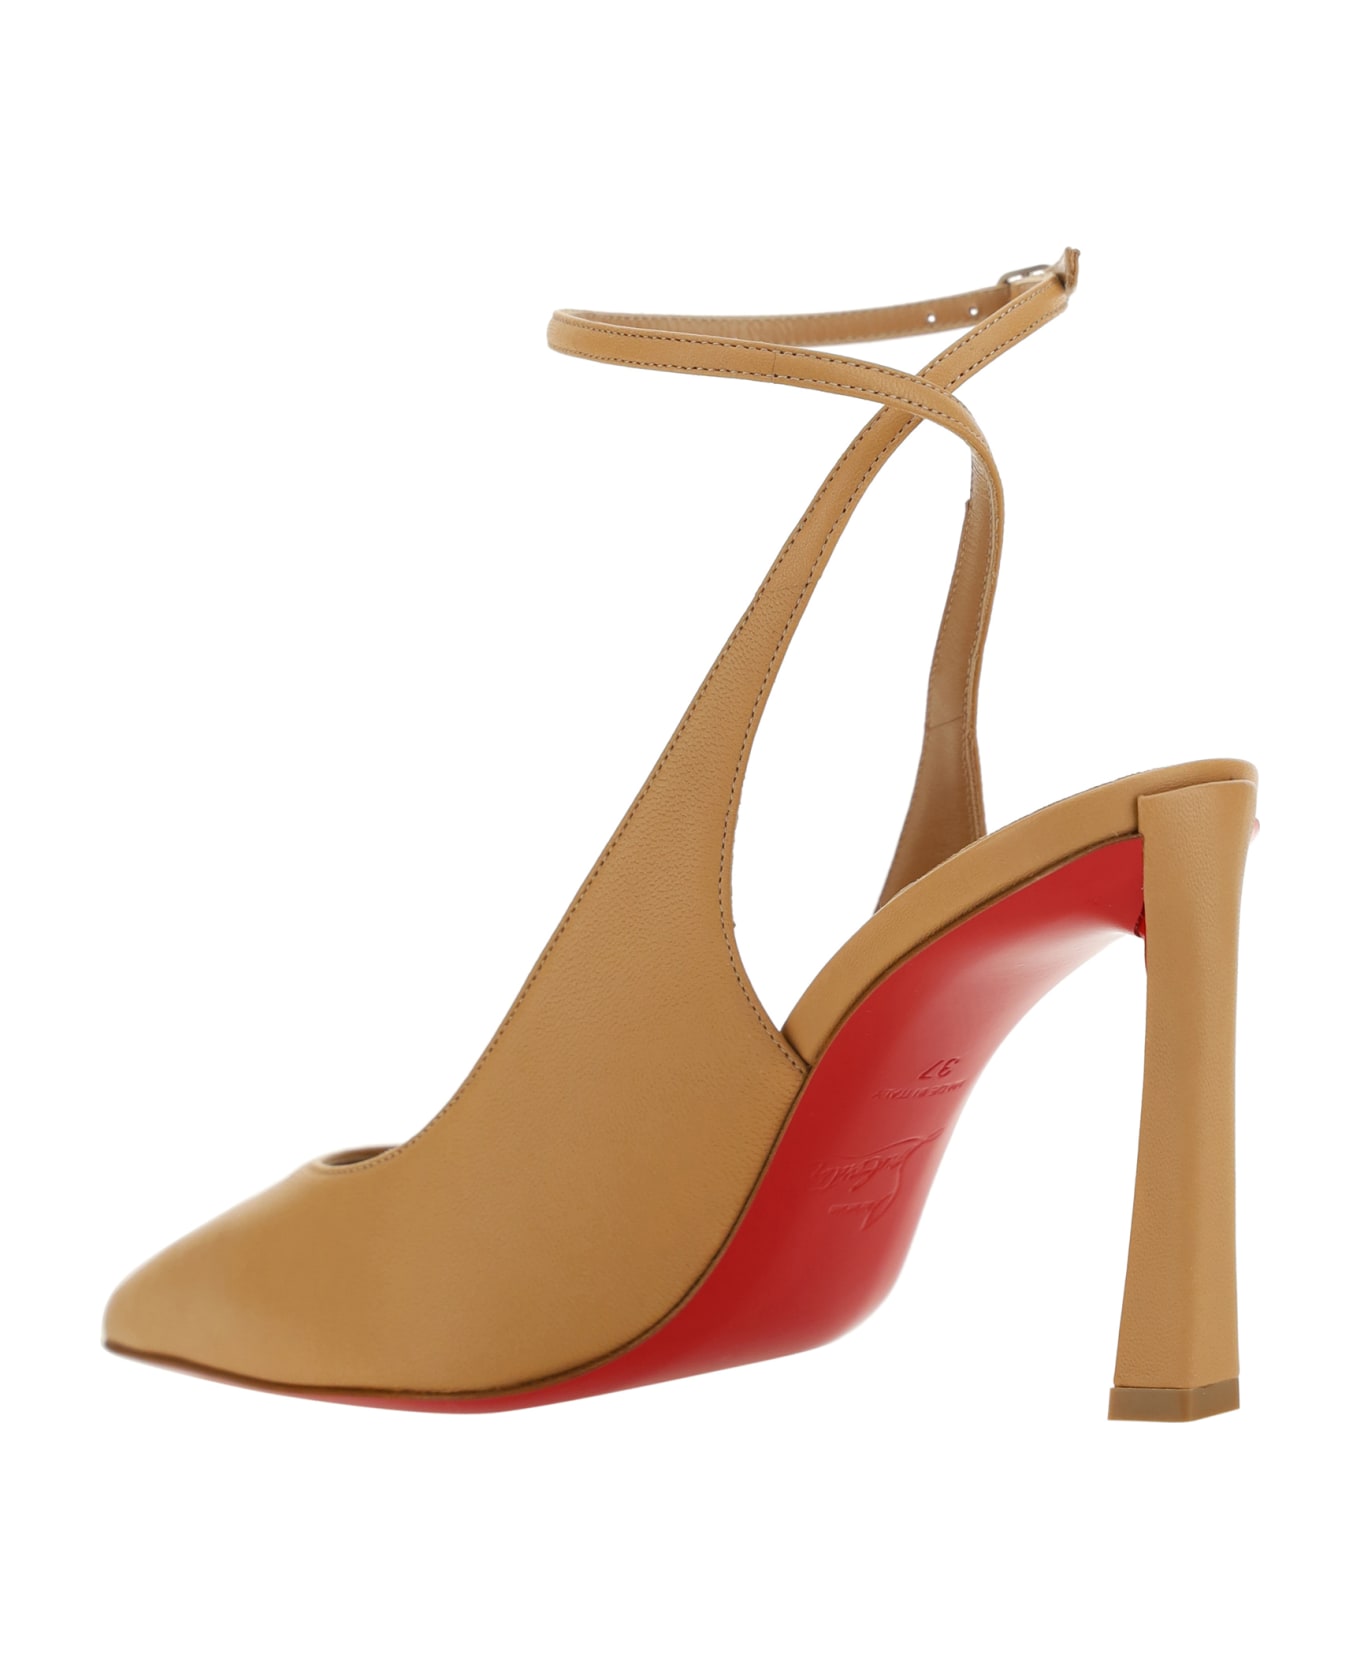 Christian Louboutin Condora Strap Pumps - Toffee/lin Toffee